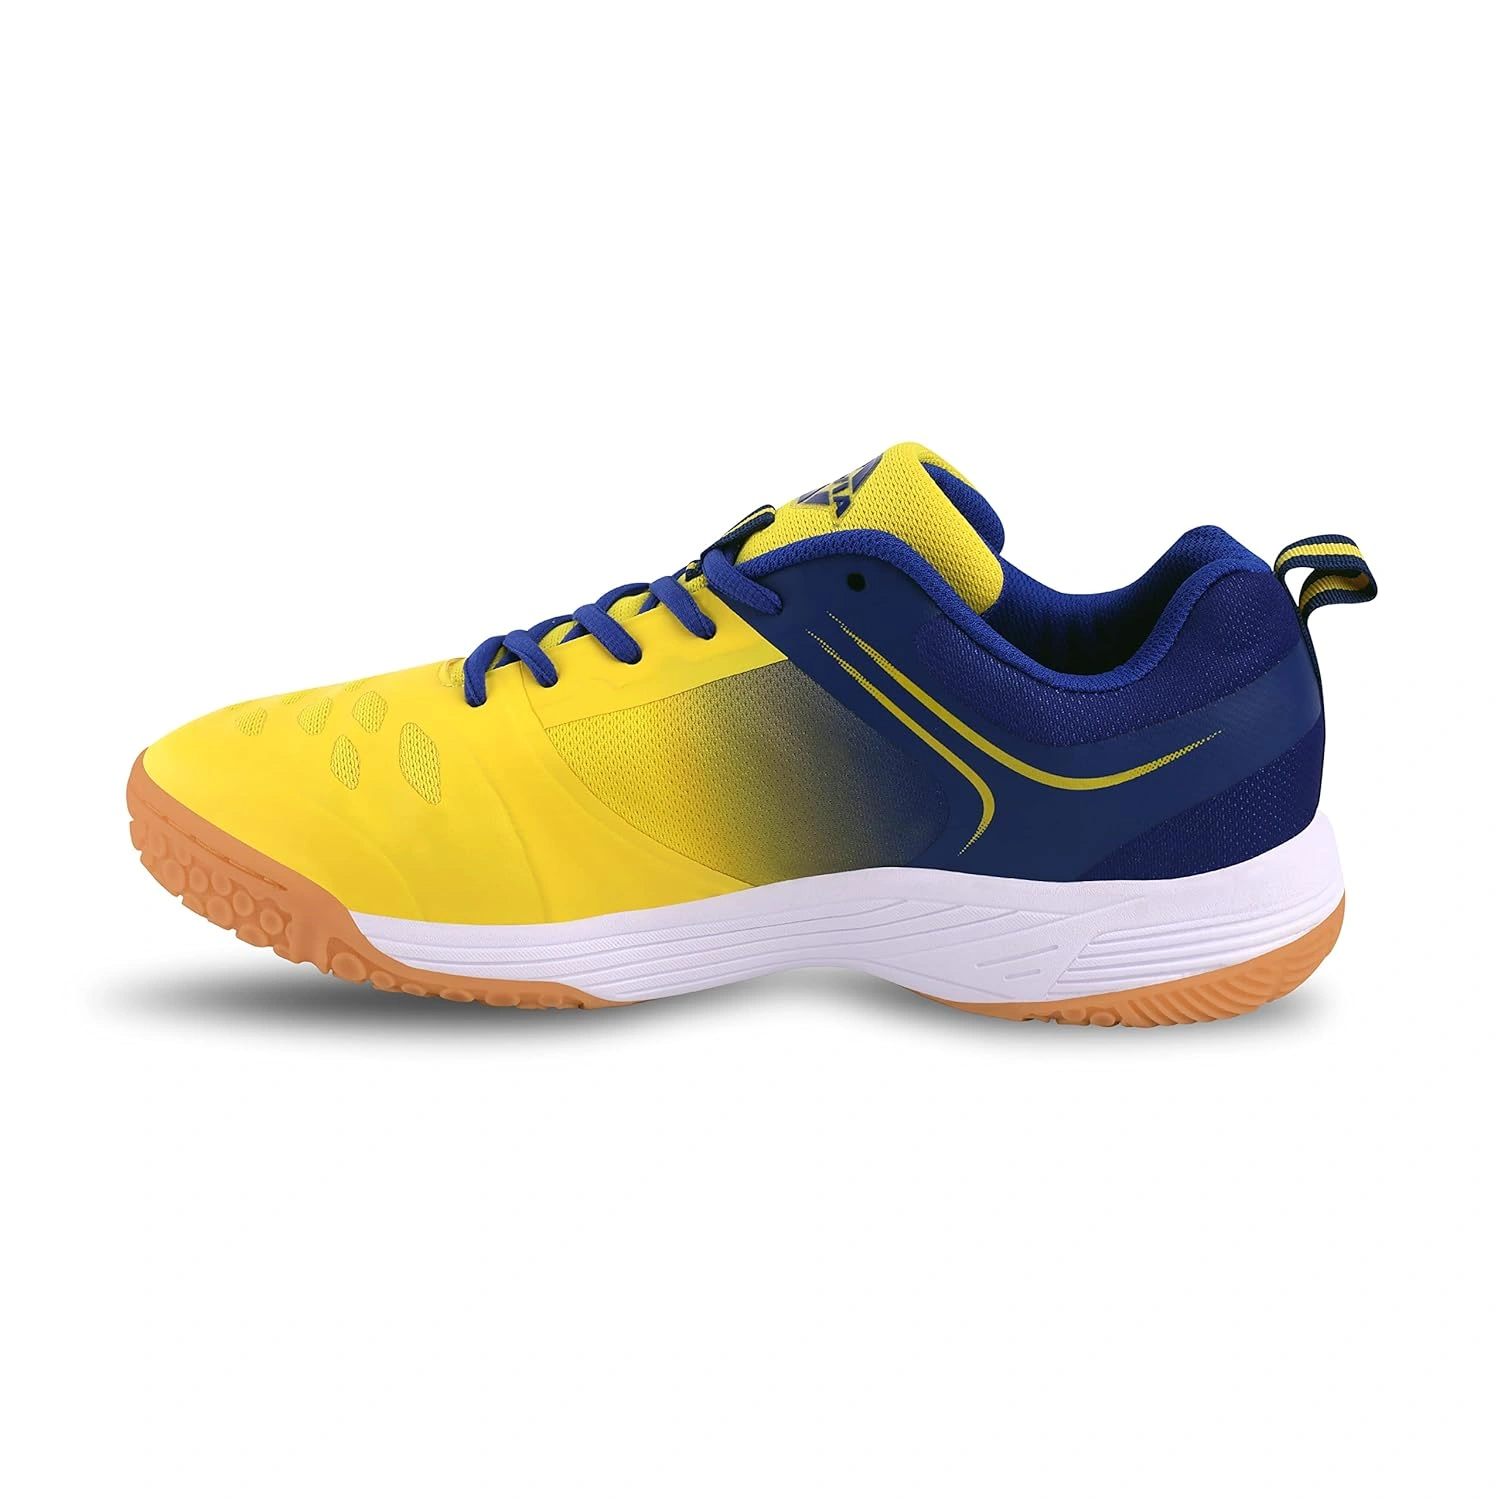 Nivia Hy-court 2.0 Badminton Shoes For Mens-52570